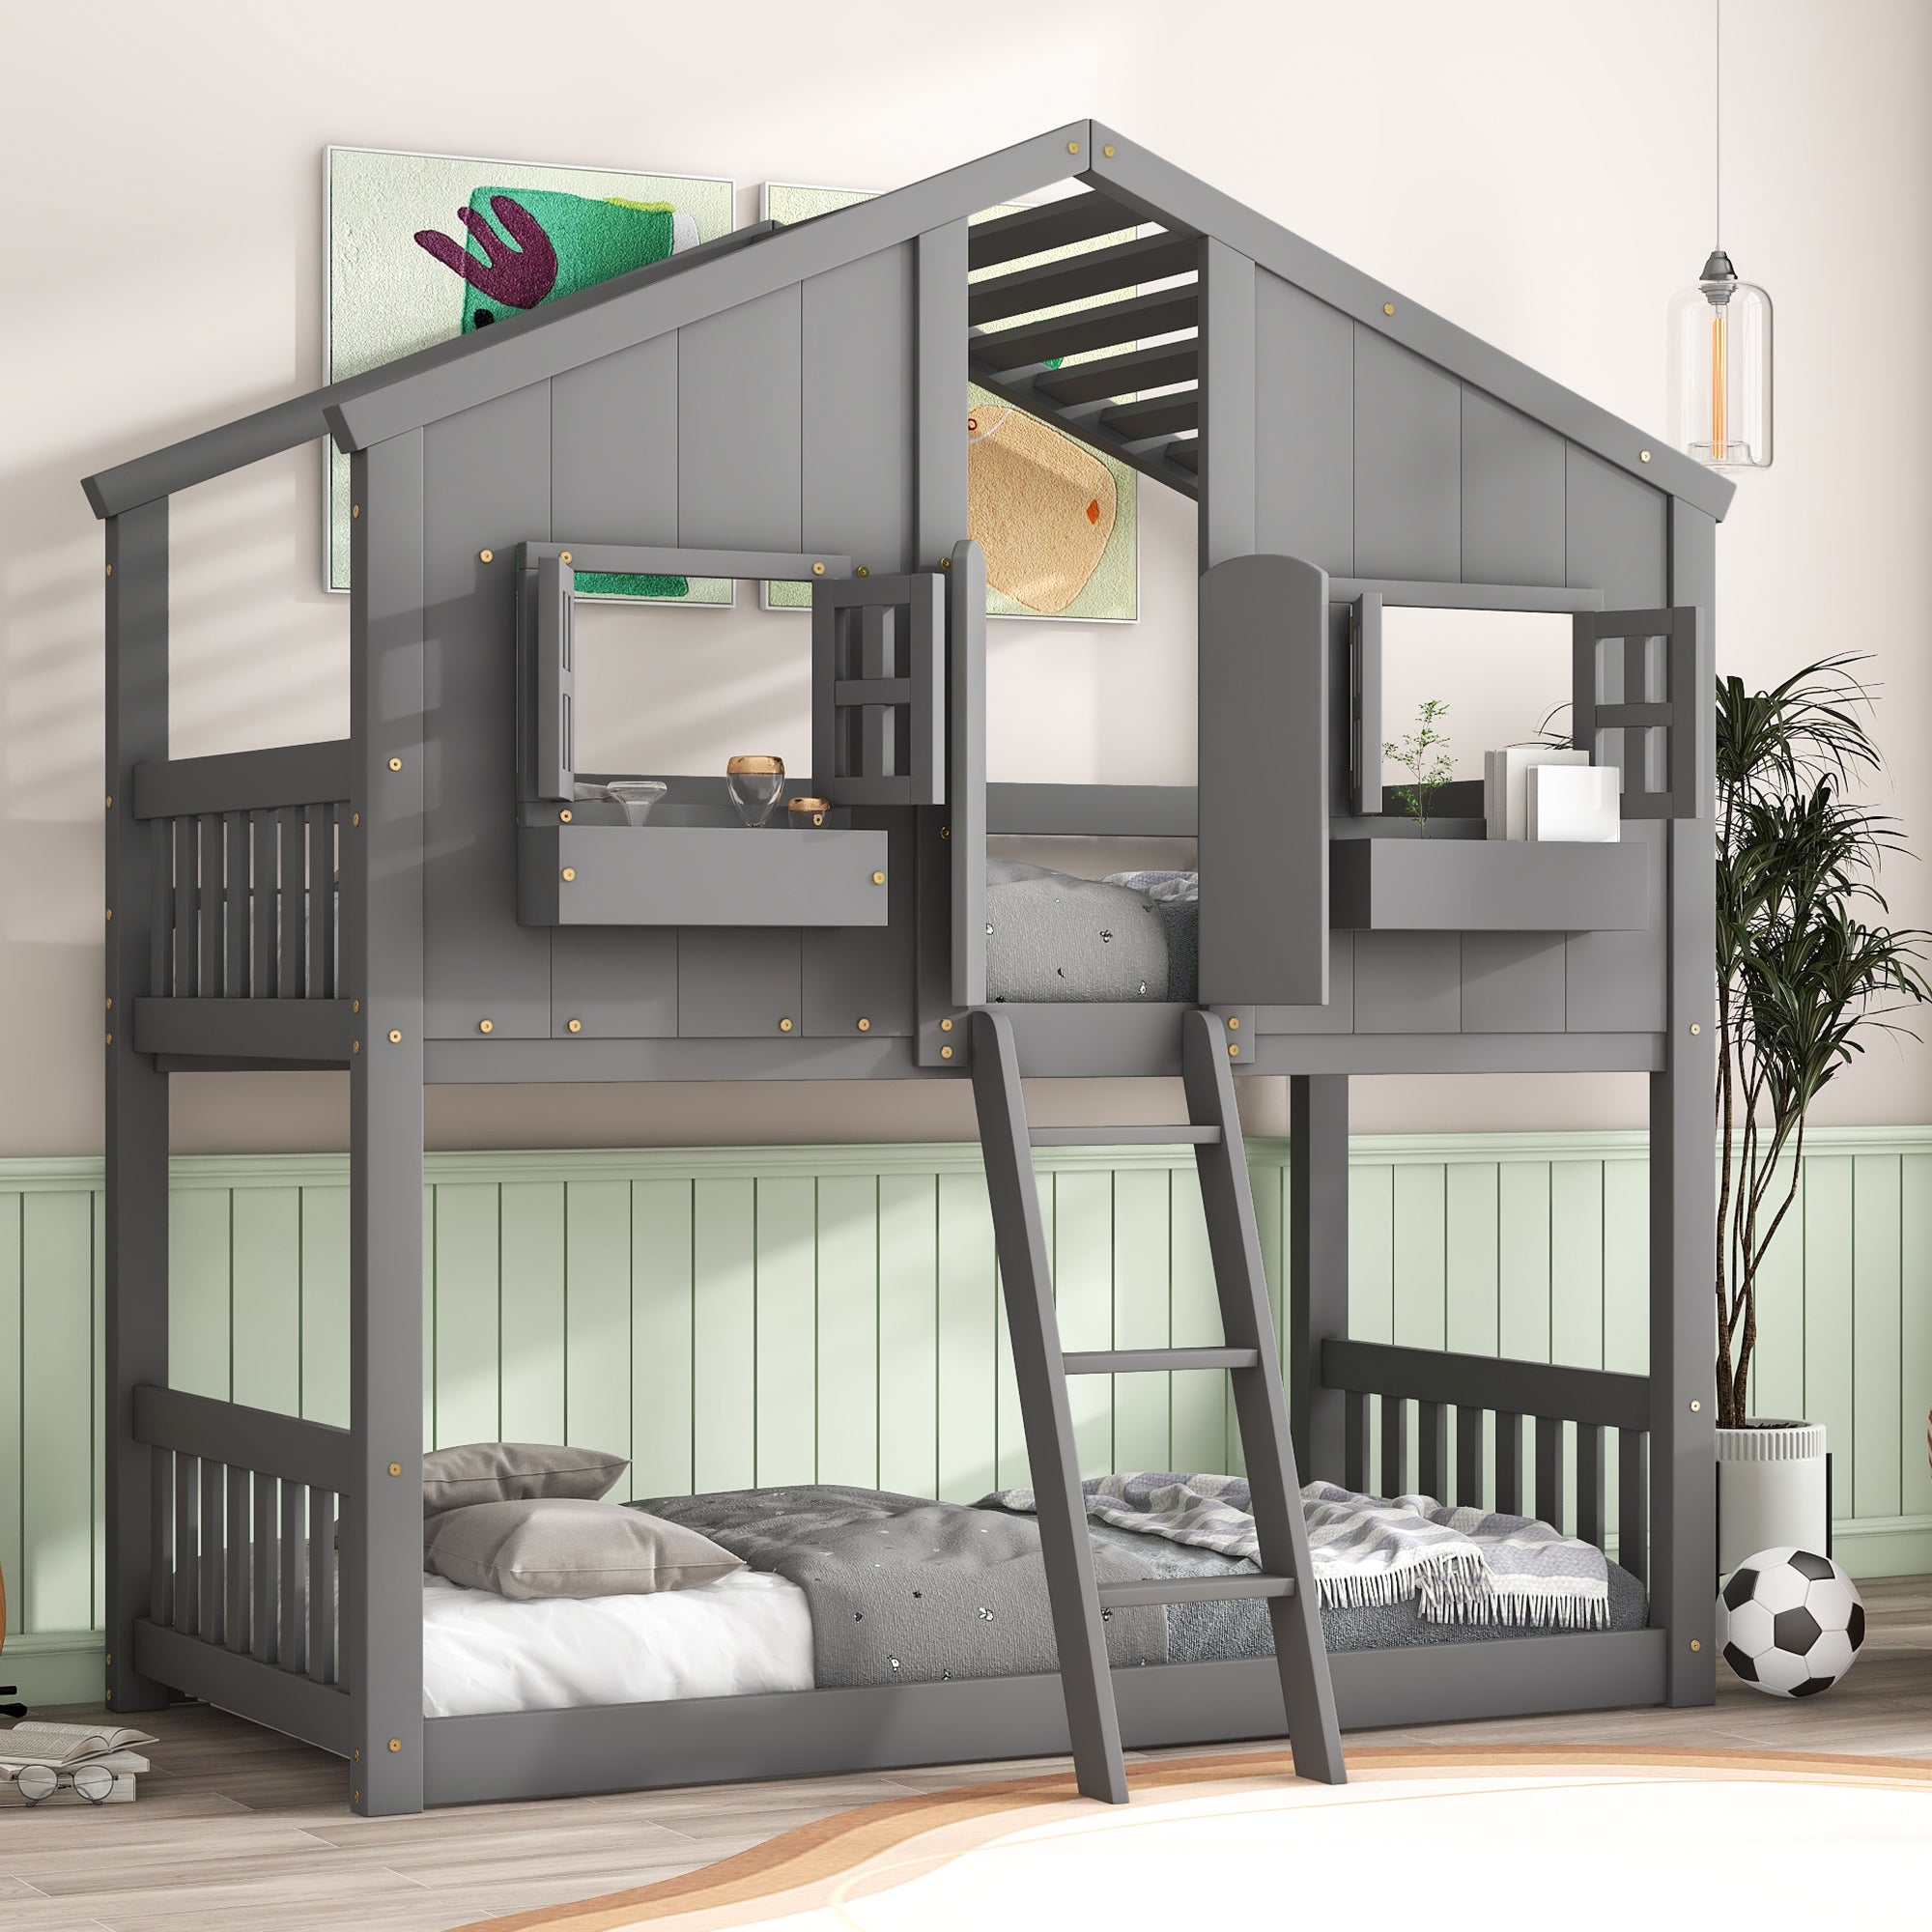 valentinciah twin over twin house bunk bed with roof and windowbunk beds 929947